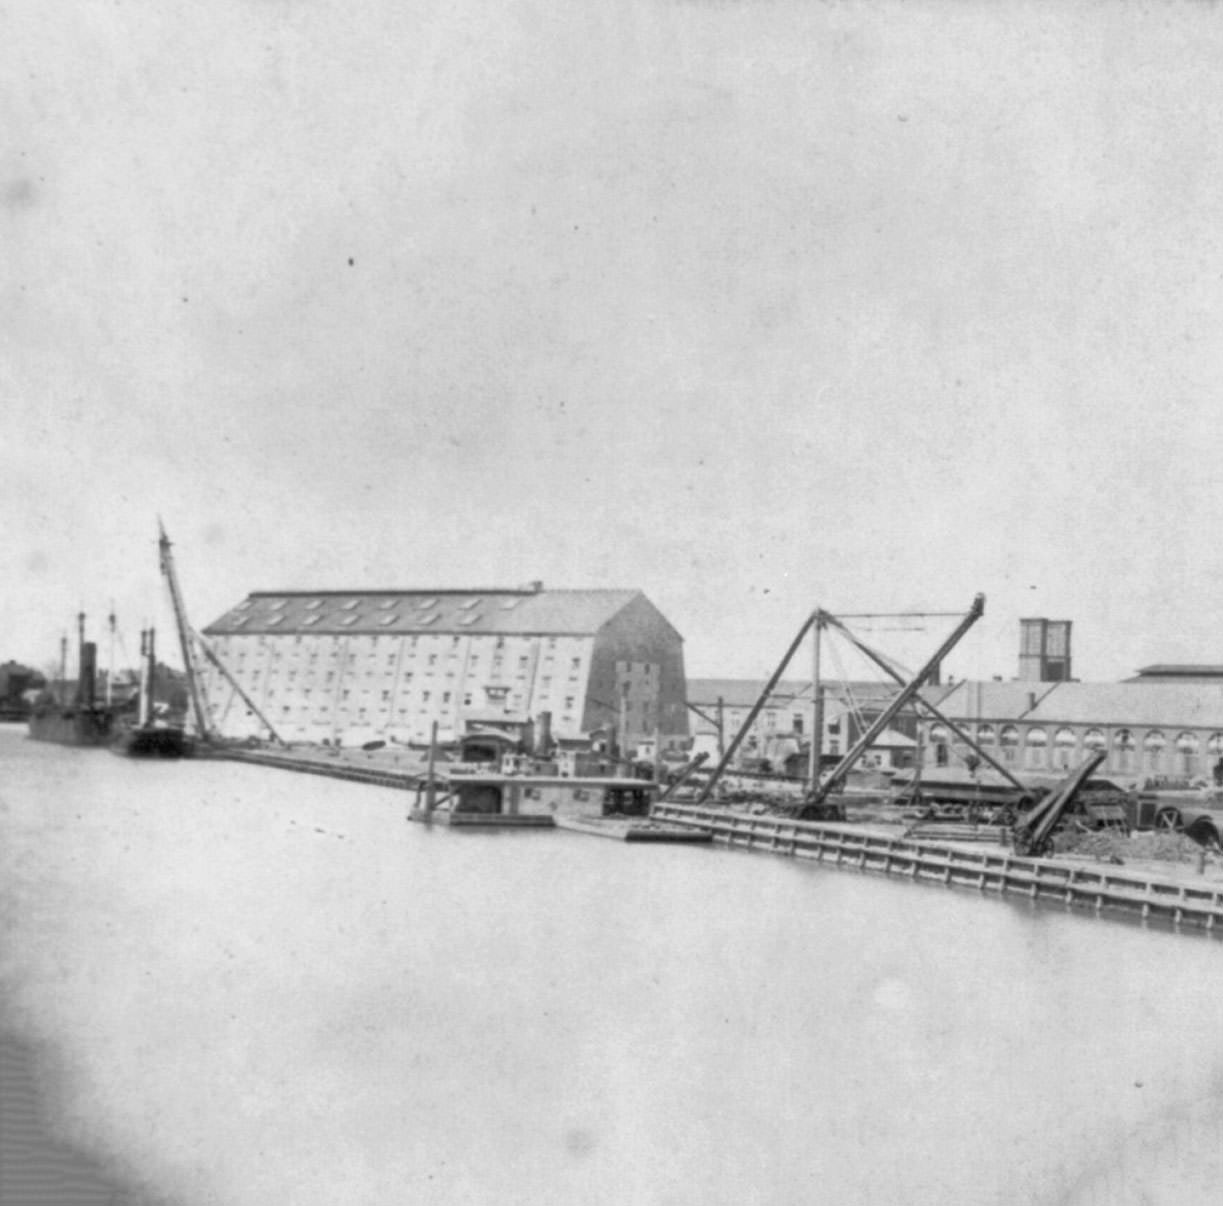 Washington Navy Yard. View of dock with large buildings and large cranes and derricks, 1867